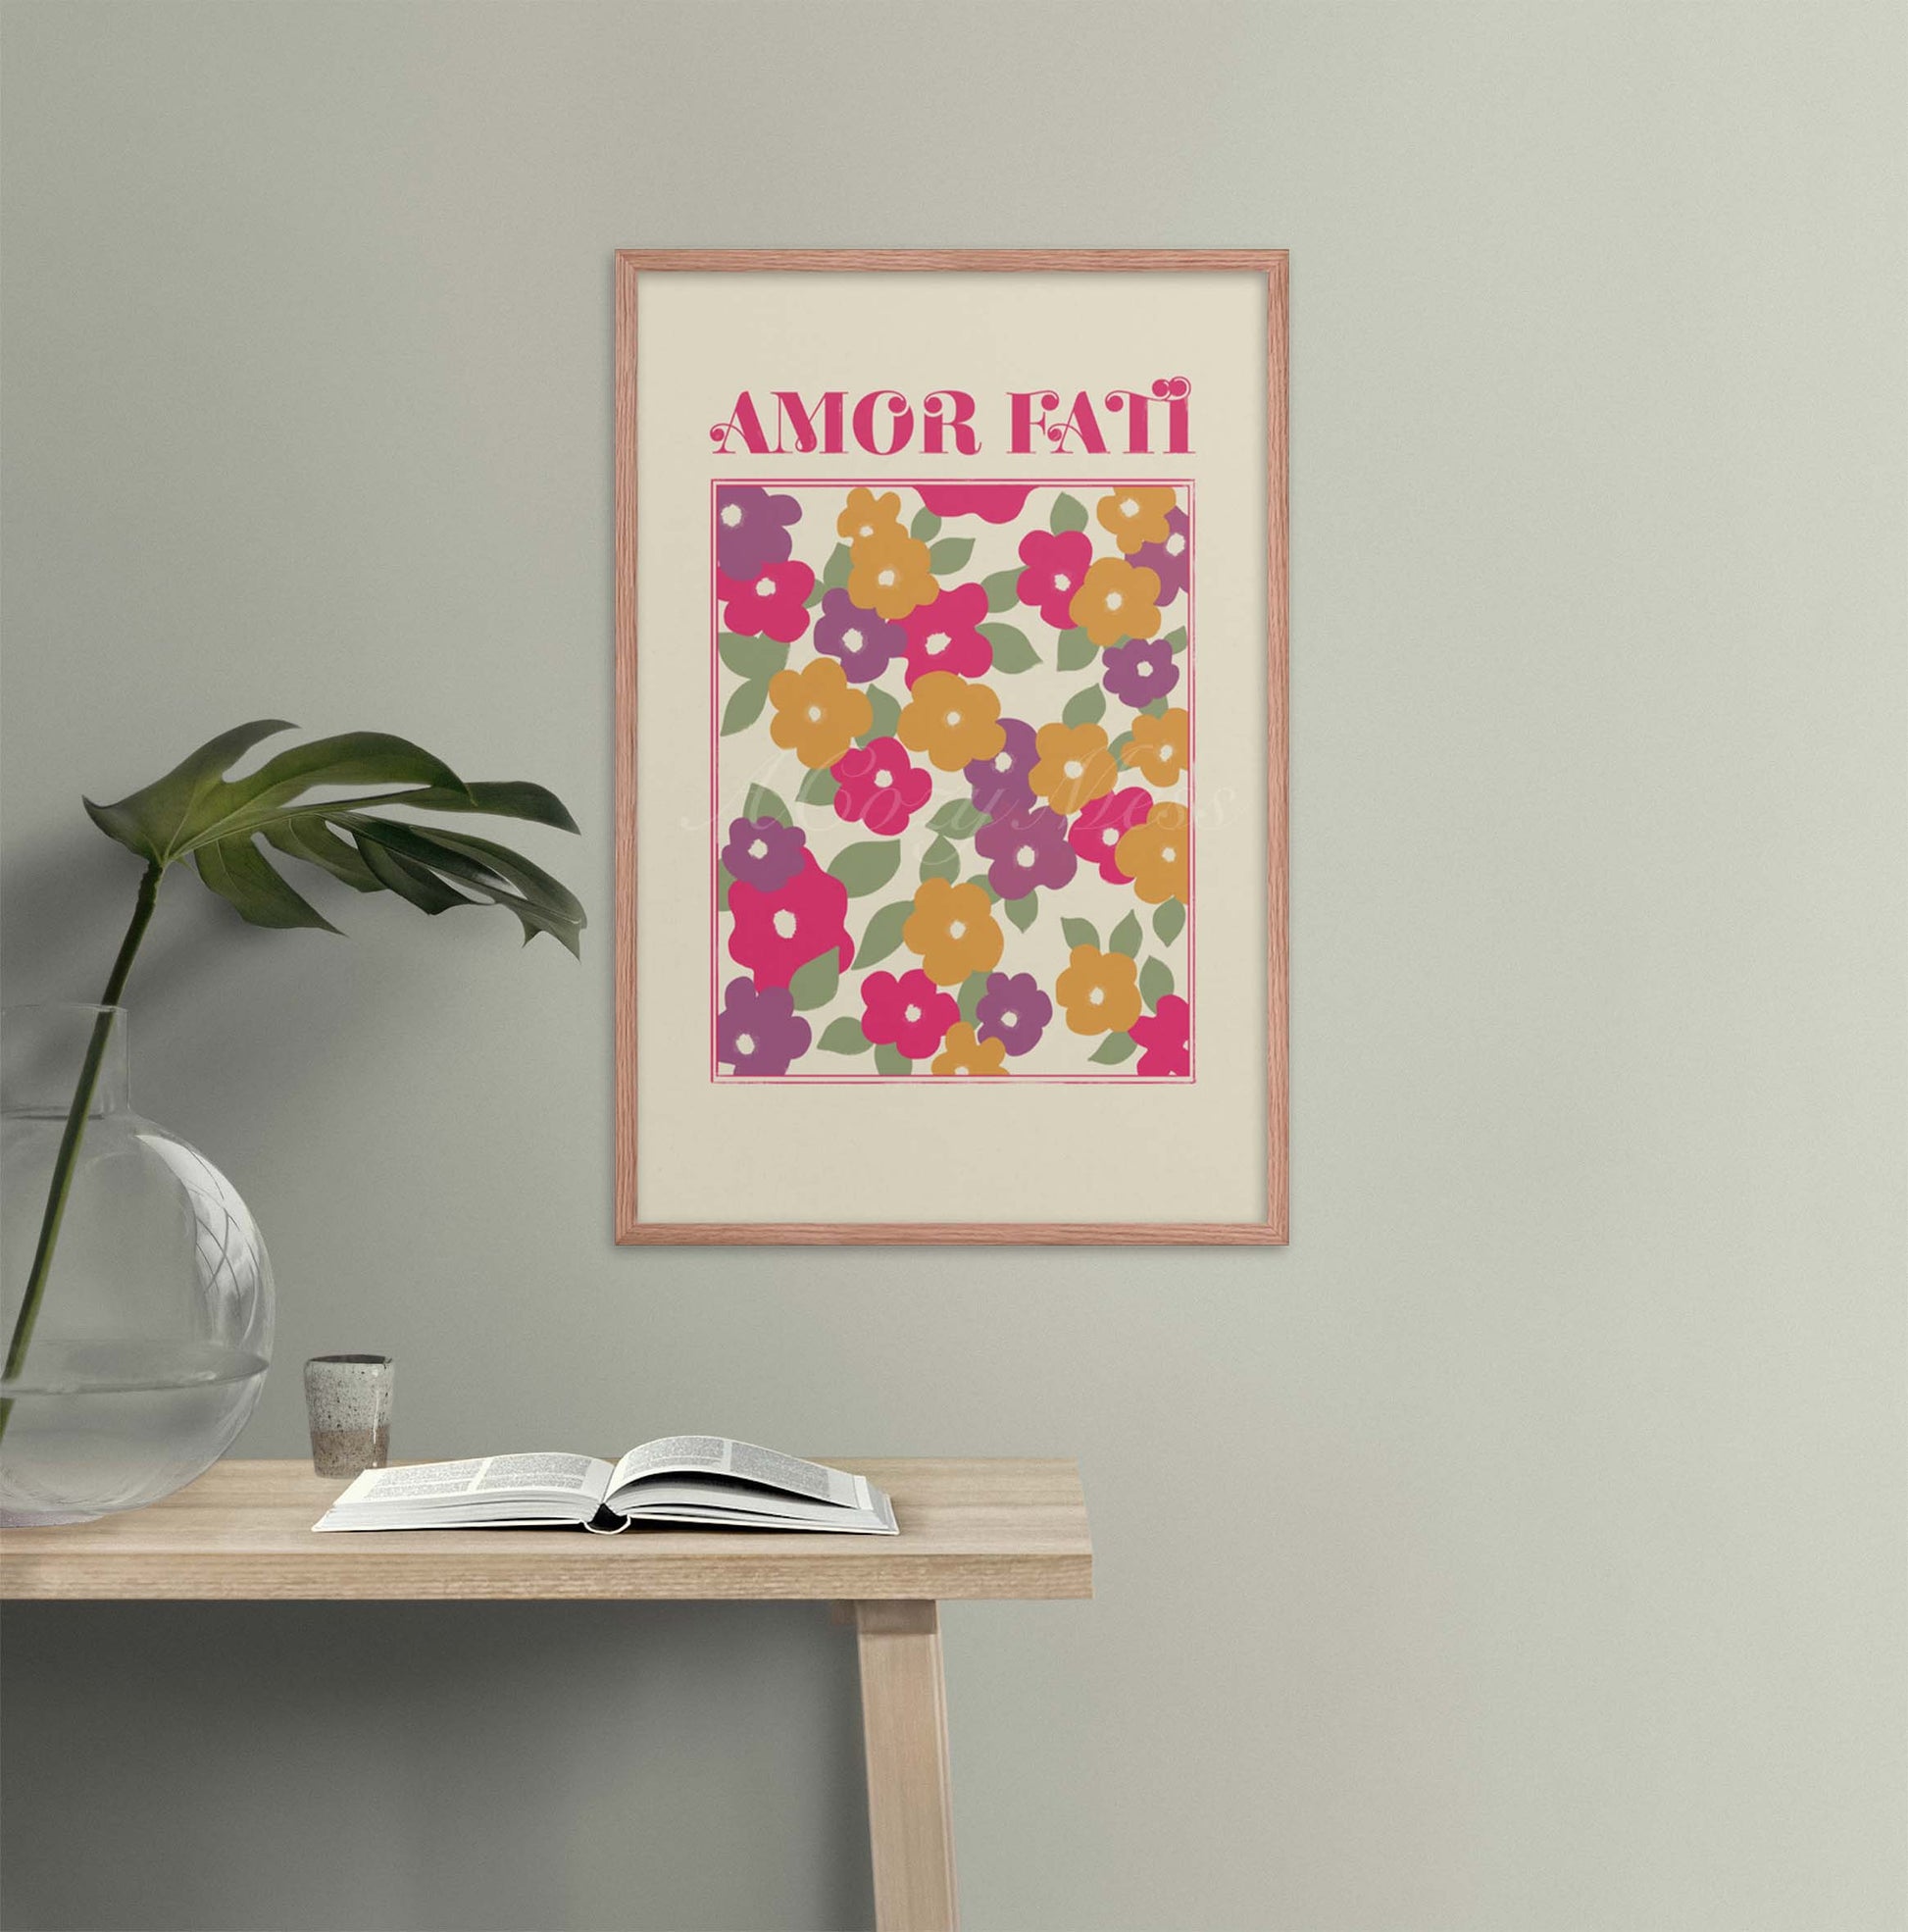 Amor Fati abstract Floral design Art Poster in bight pink, purple, green & green on light beige background in oak frame.